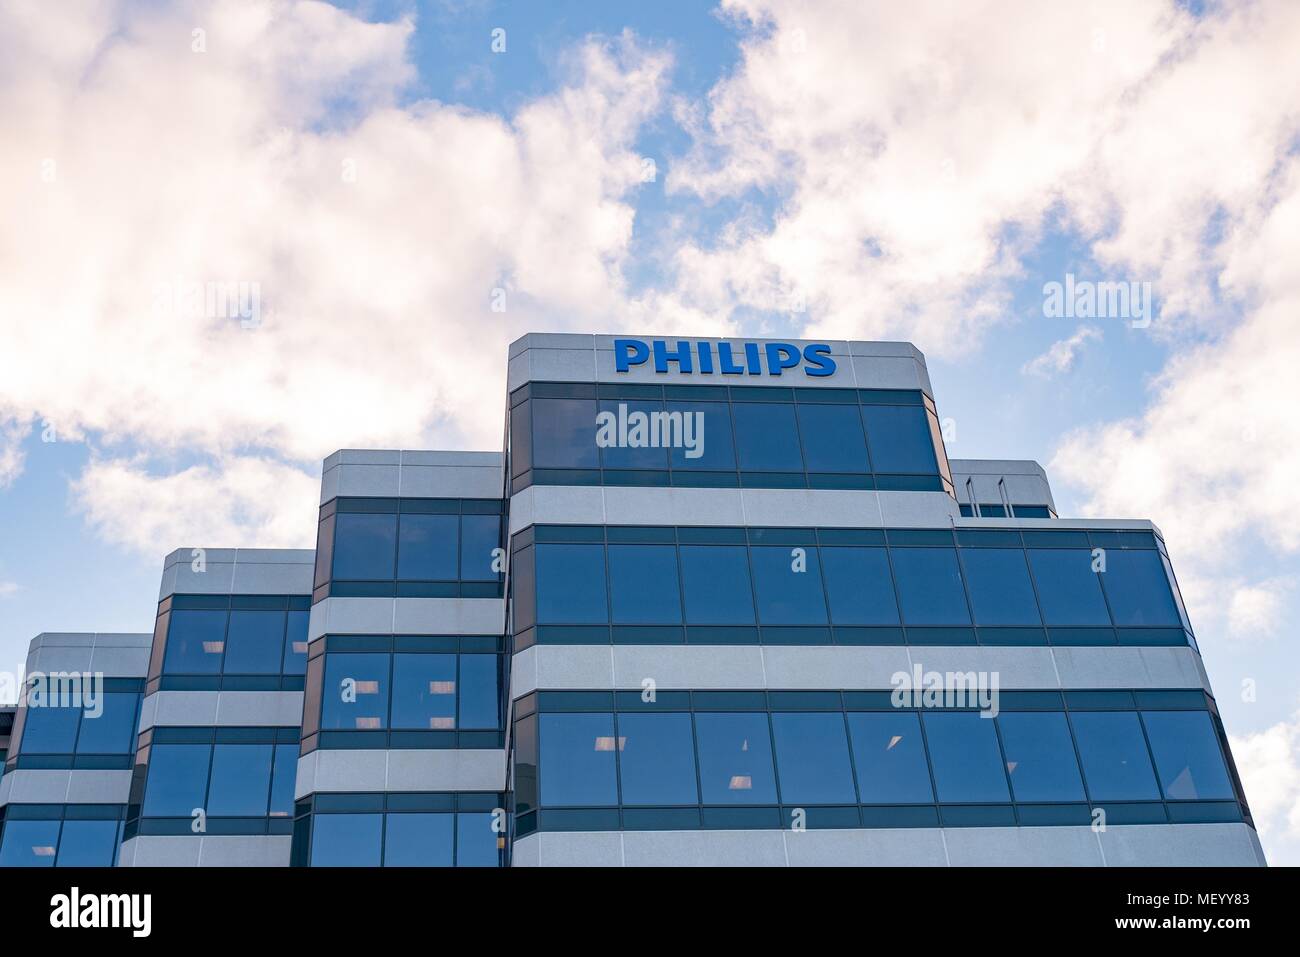 Facade with logo and sign at the regional headquarters of technology company Philips in Pleasanton, California, April 16, 2018. () Stock Photo